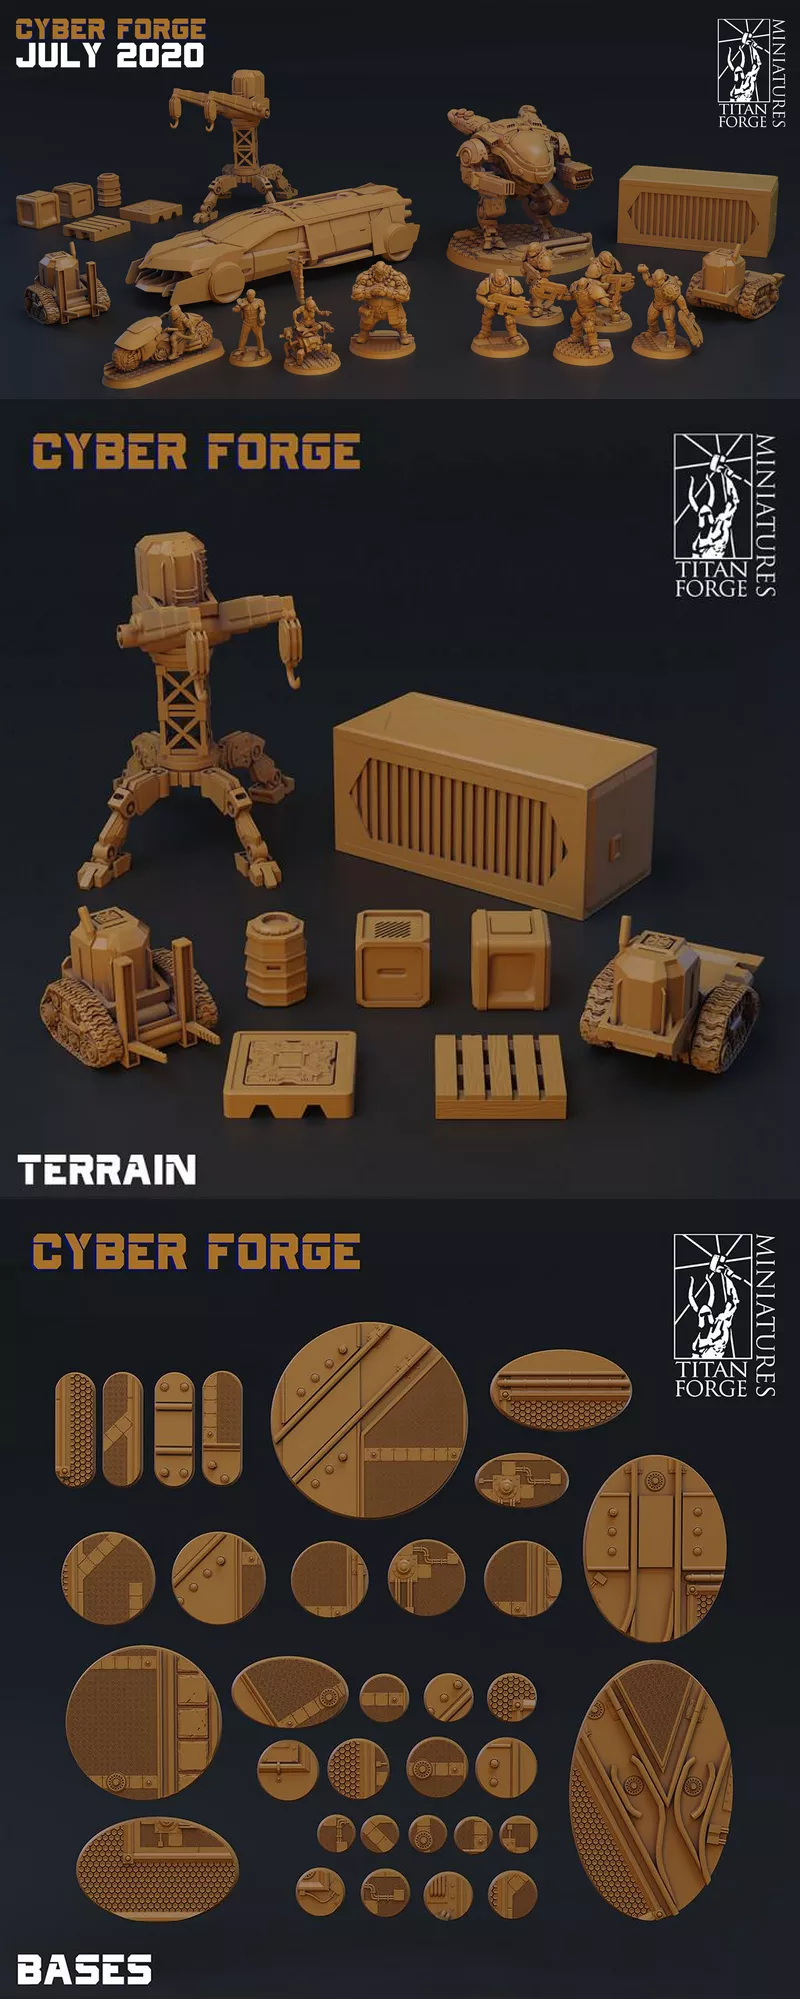 Cyber Forge Welcome Pack - Titan Forge Miniatures